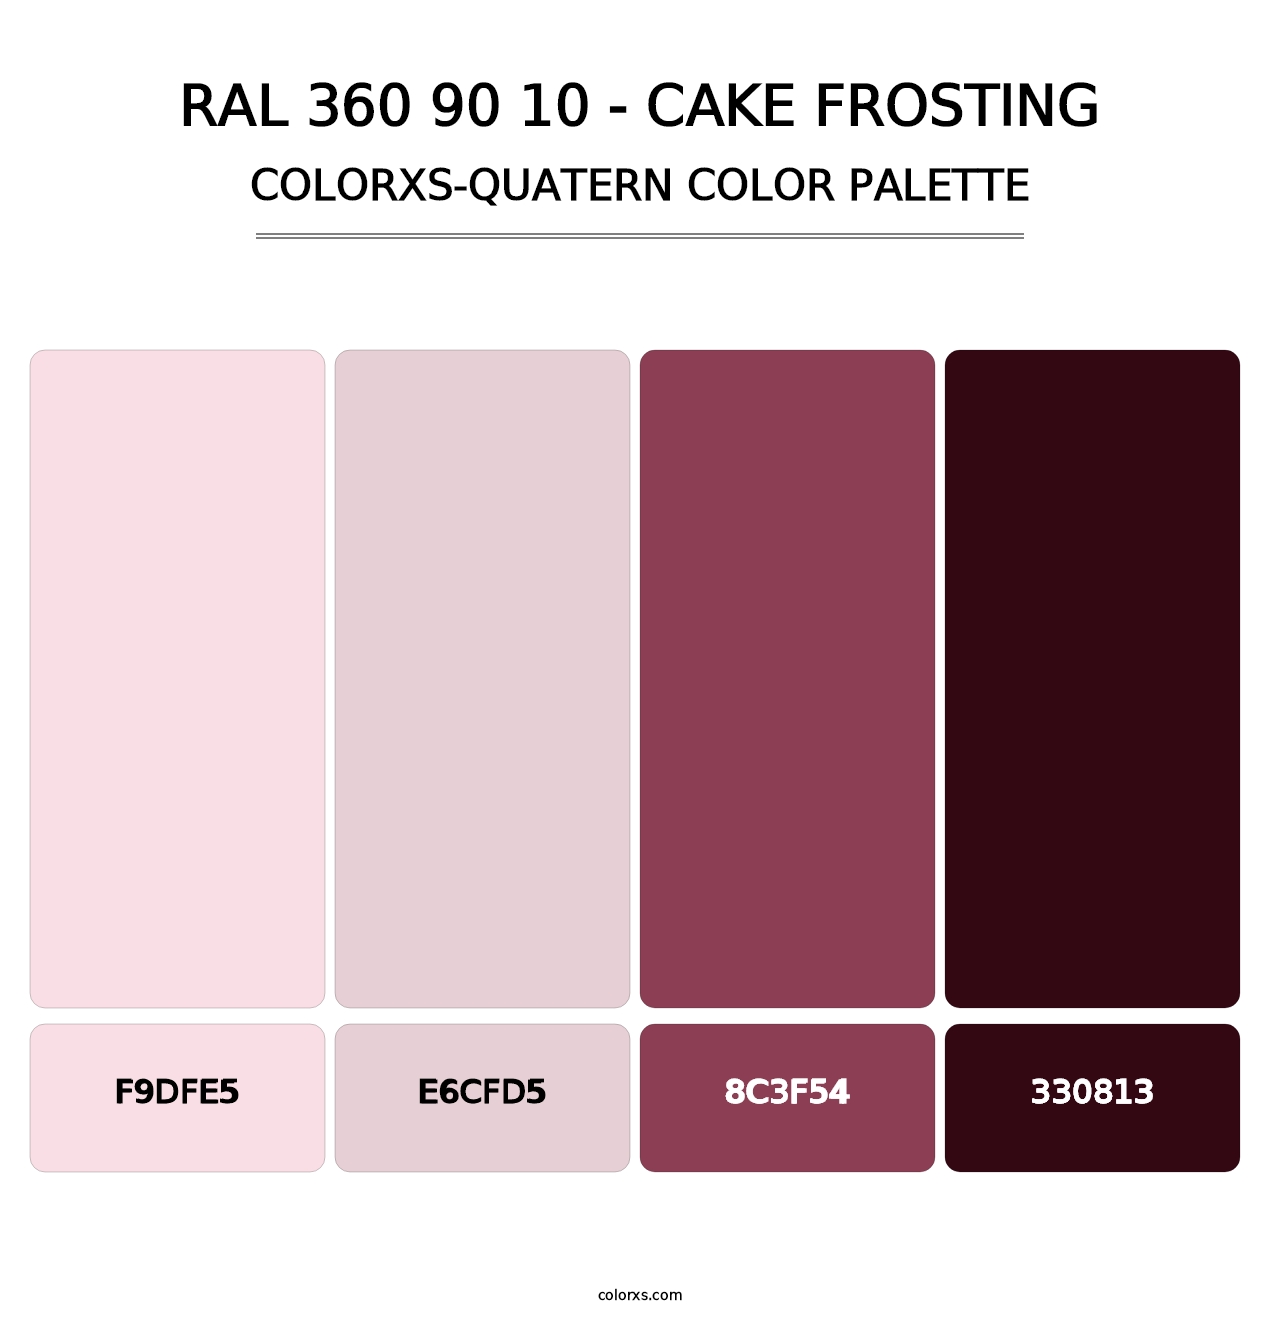 RAL 360 90 10 - Cake Frosting - Colorxs Quatern Palette